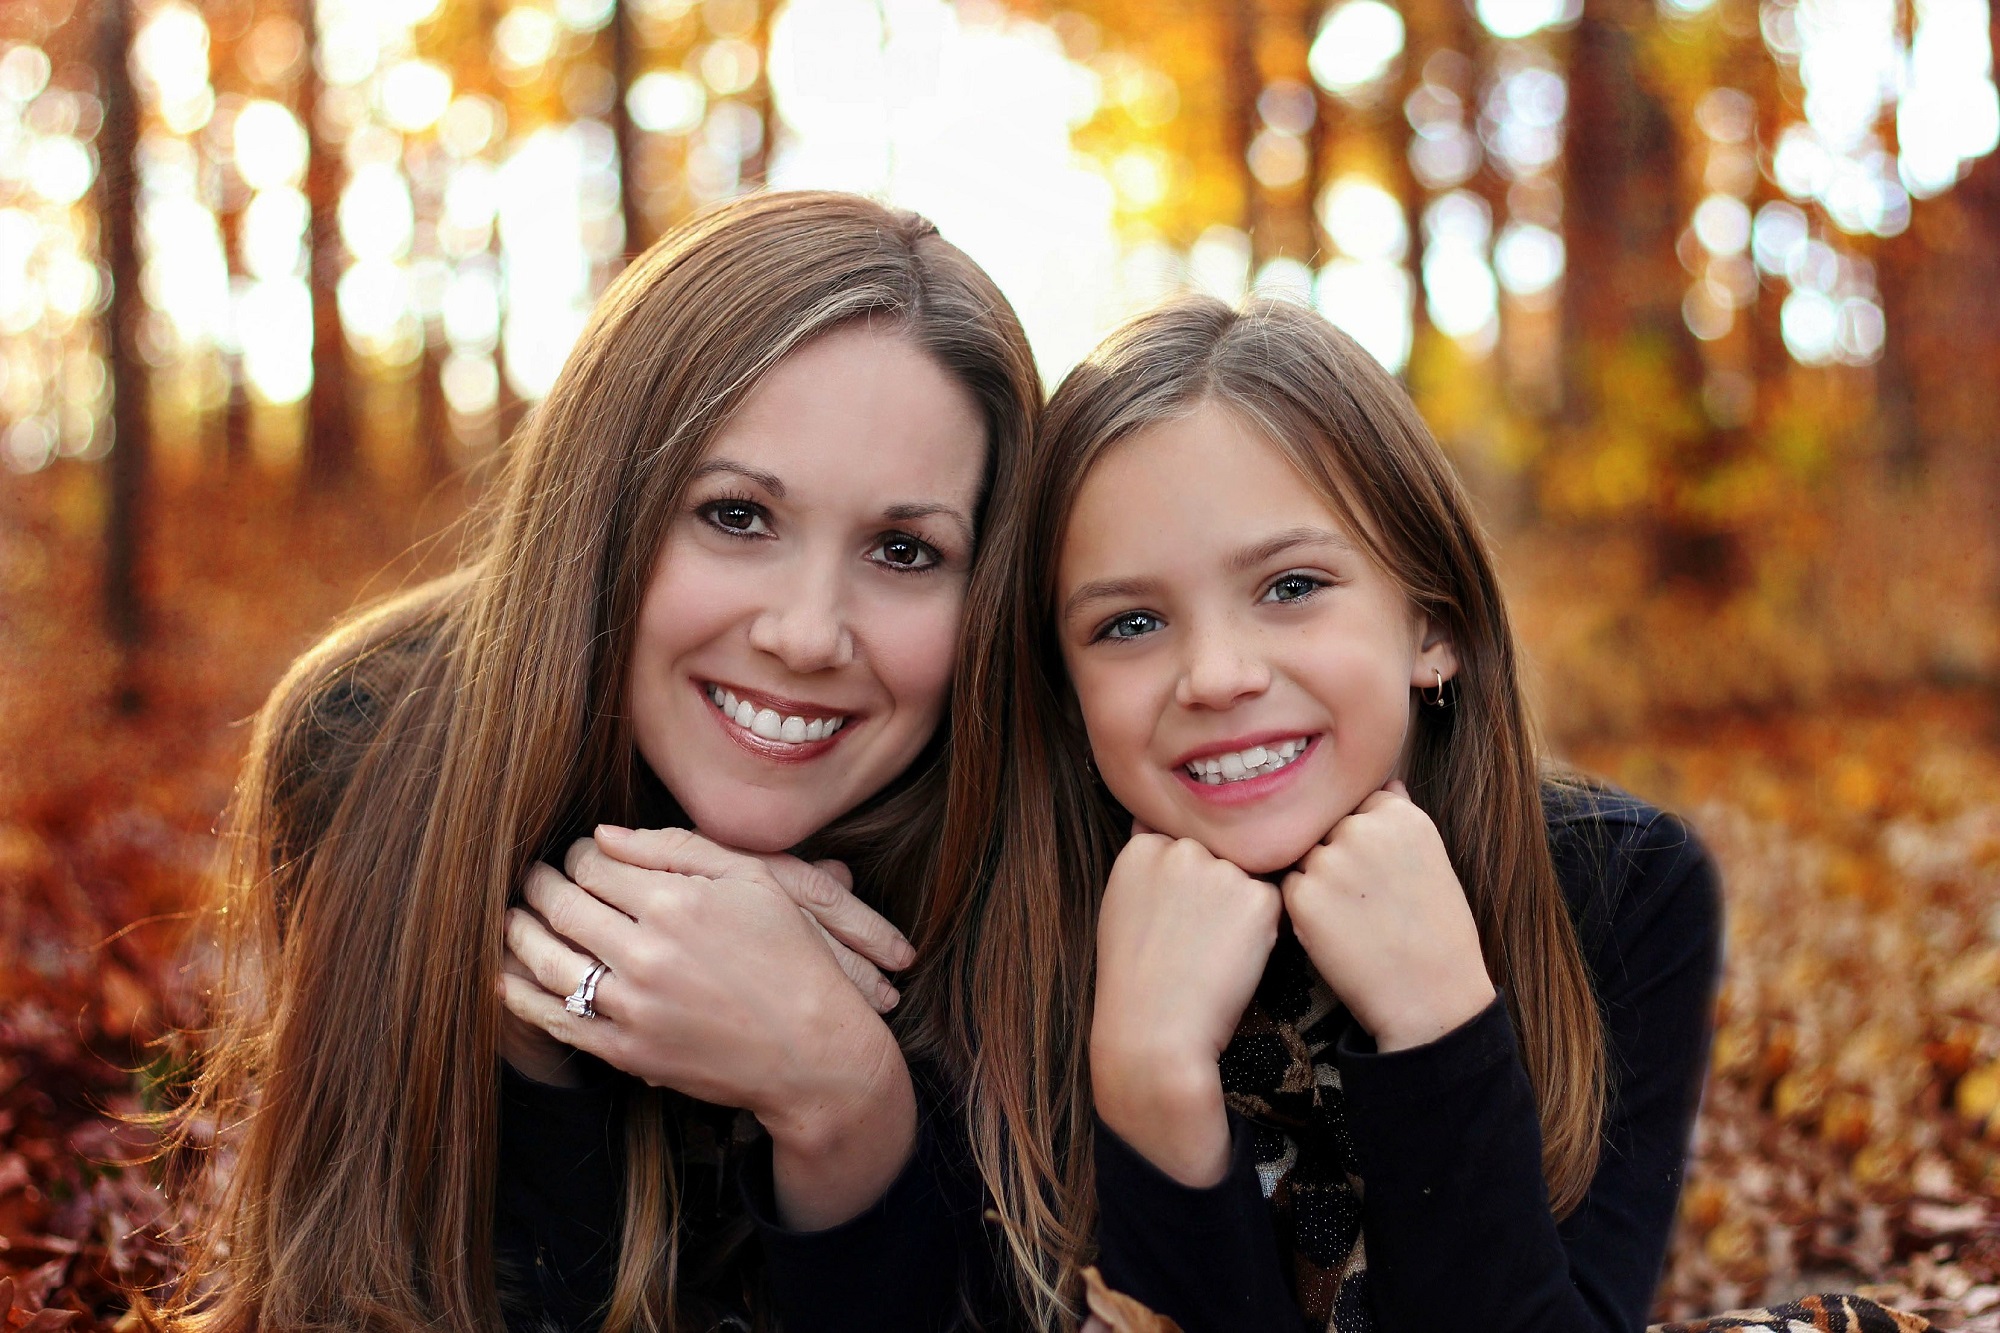 Mother Daughter Same Outfits Posing On Stock Photo 300478982 | Shutterstock